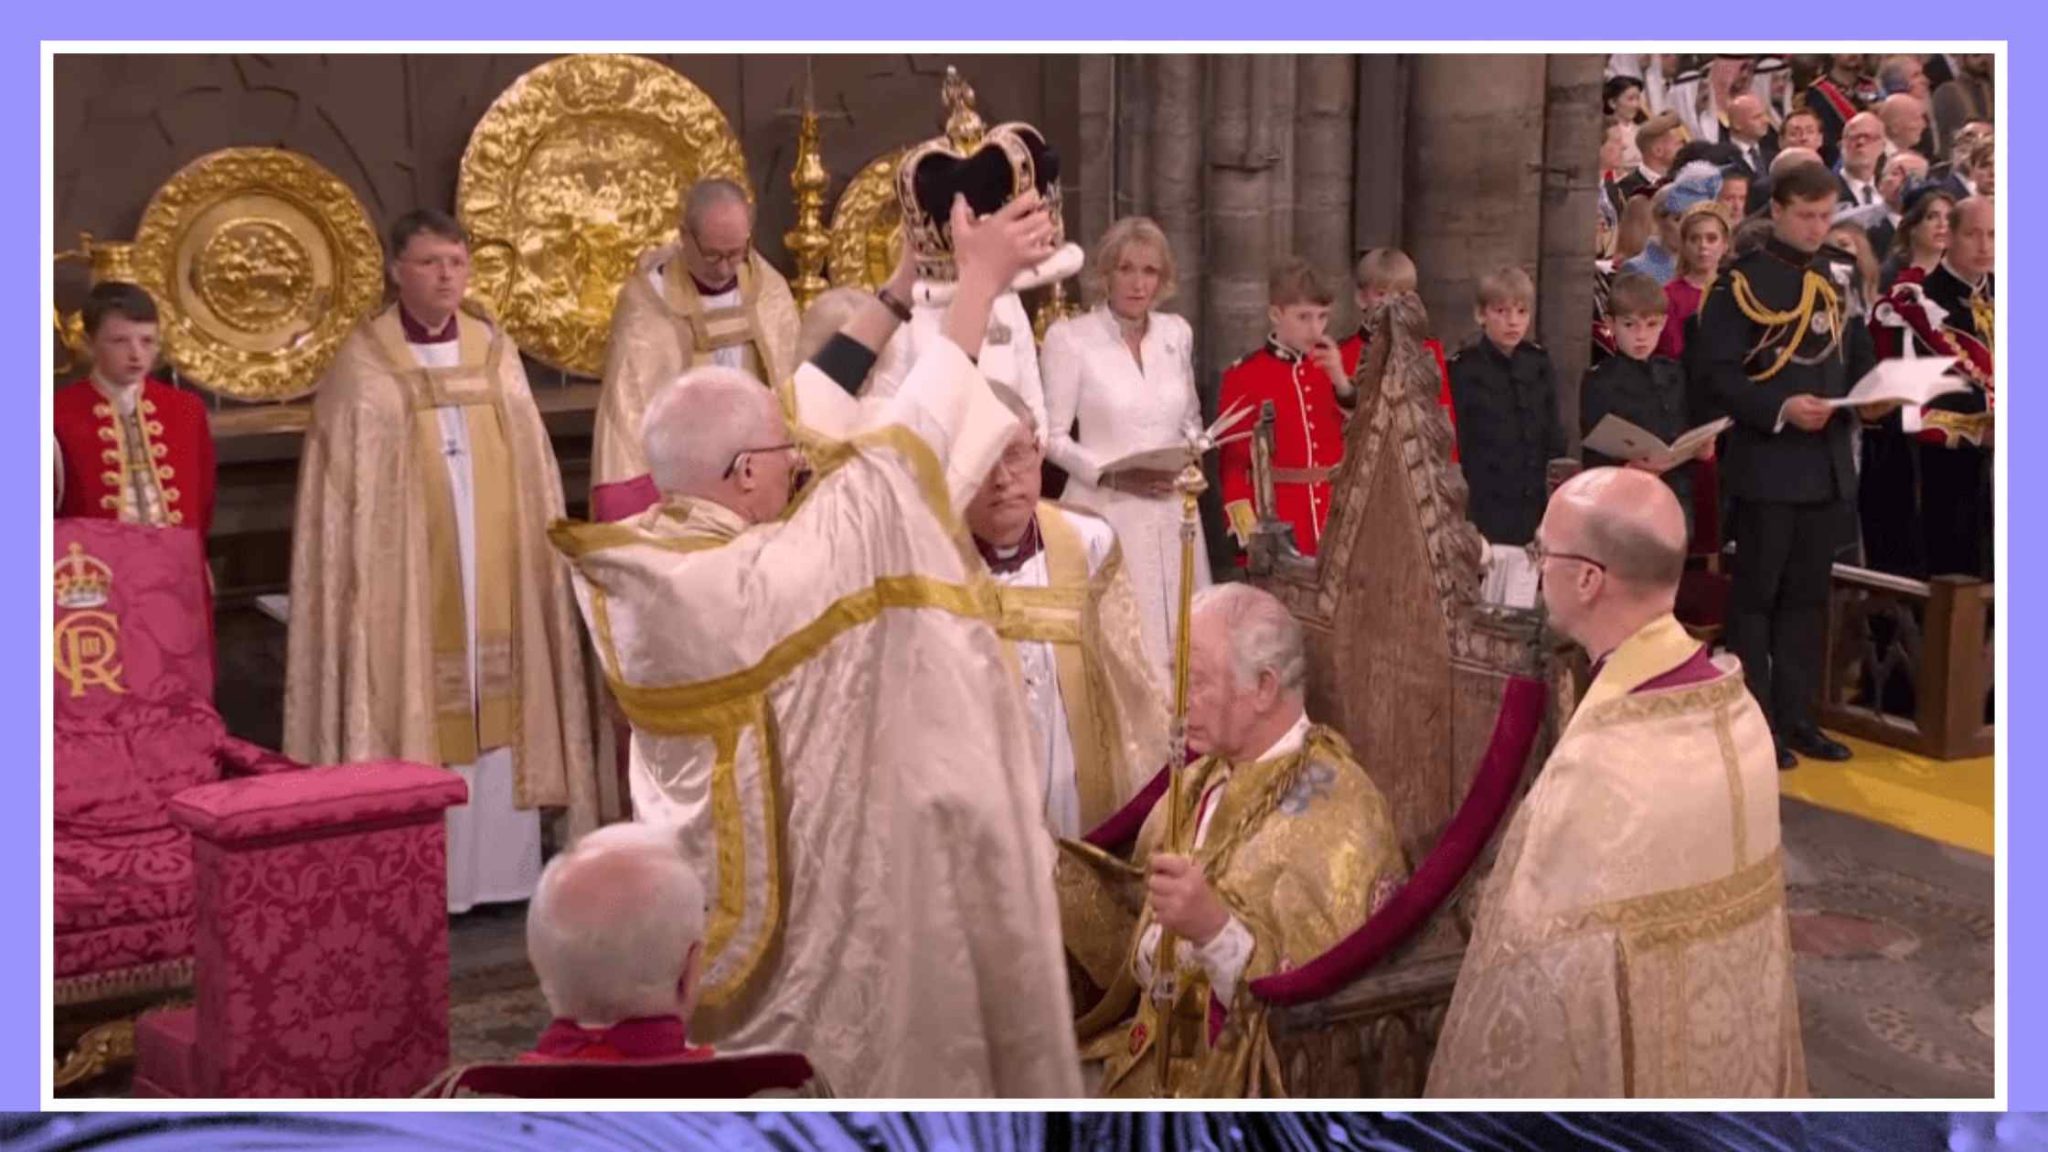 King Charles III and Queen Camilla formally crowned at Westminster Abbey Transcript